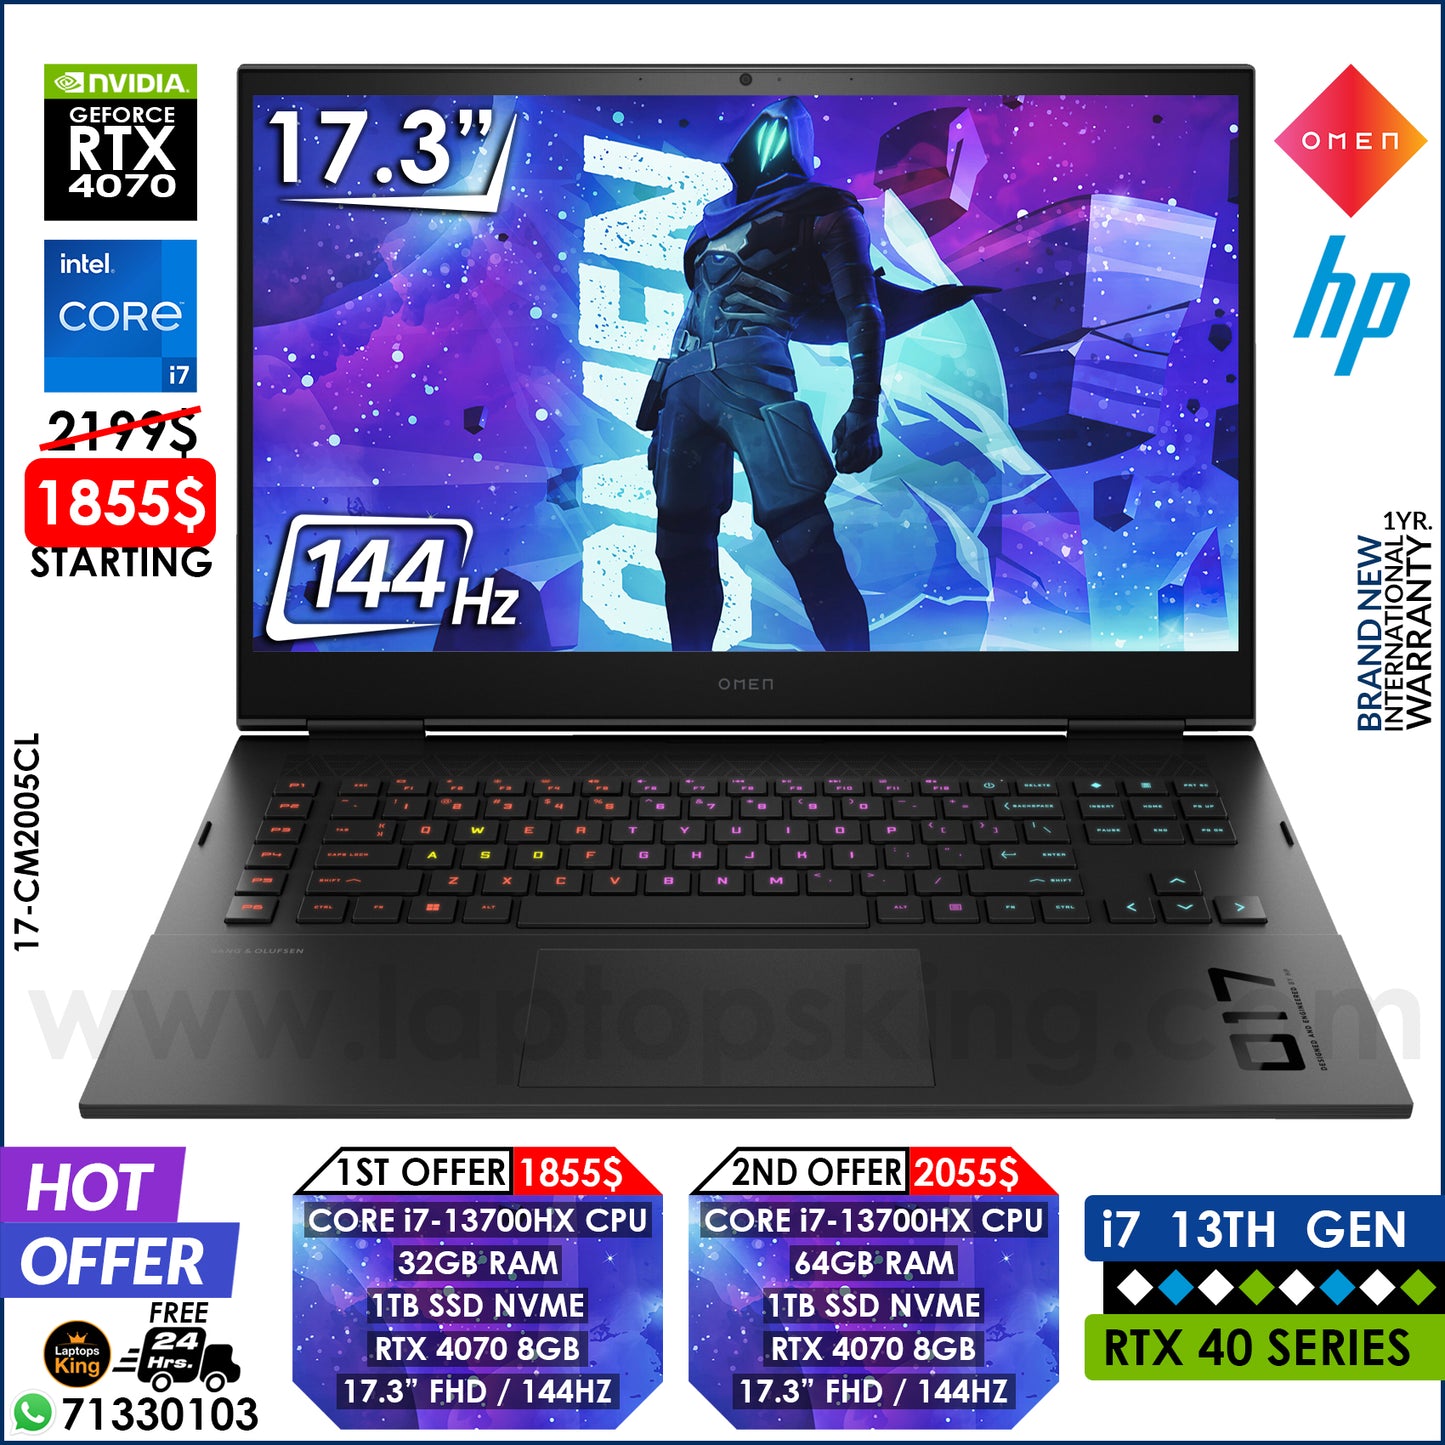 HP Omen 17-CM2005CL Core i7-13700hx Rtx 4070 144hz 17.3" Gaming Laptop Offers (Brand New)